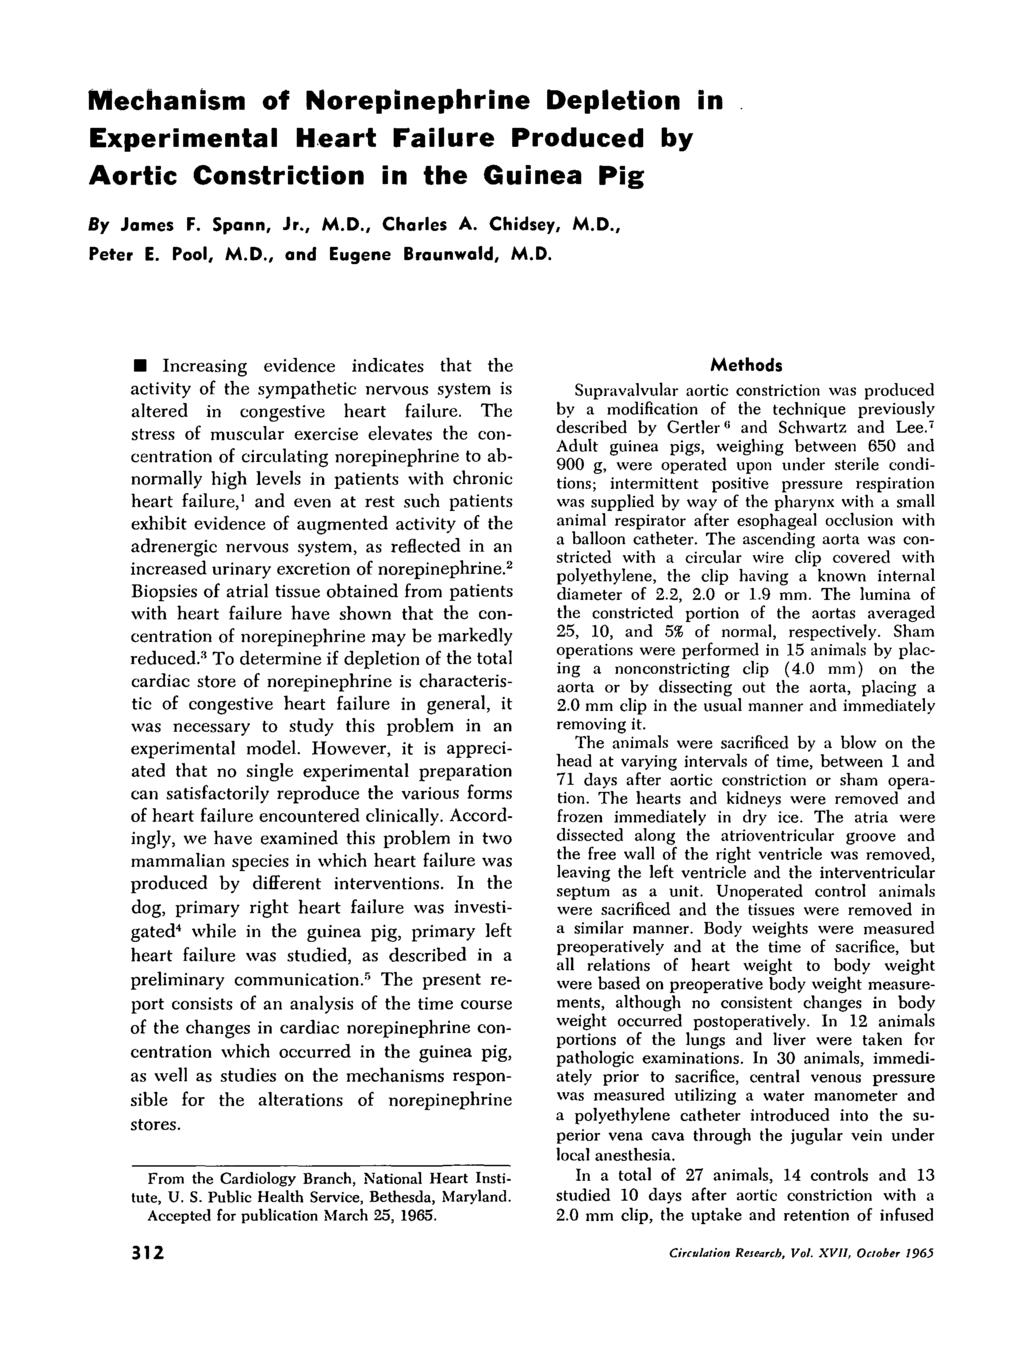 Mechanism of Norepinephrine Depletion in Experimental Heart Failure Produced by Aortic Constriction in the Guinea Pig By James F. Spann, Jr., M.D., Charles A. Chidsey, M.D., Peter E. Pool, M.D., and Eugene Braunwald, M.